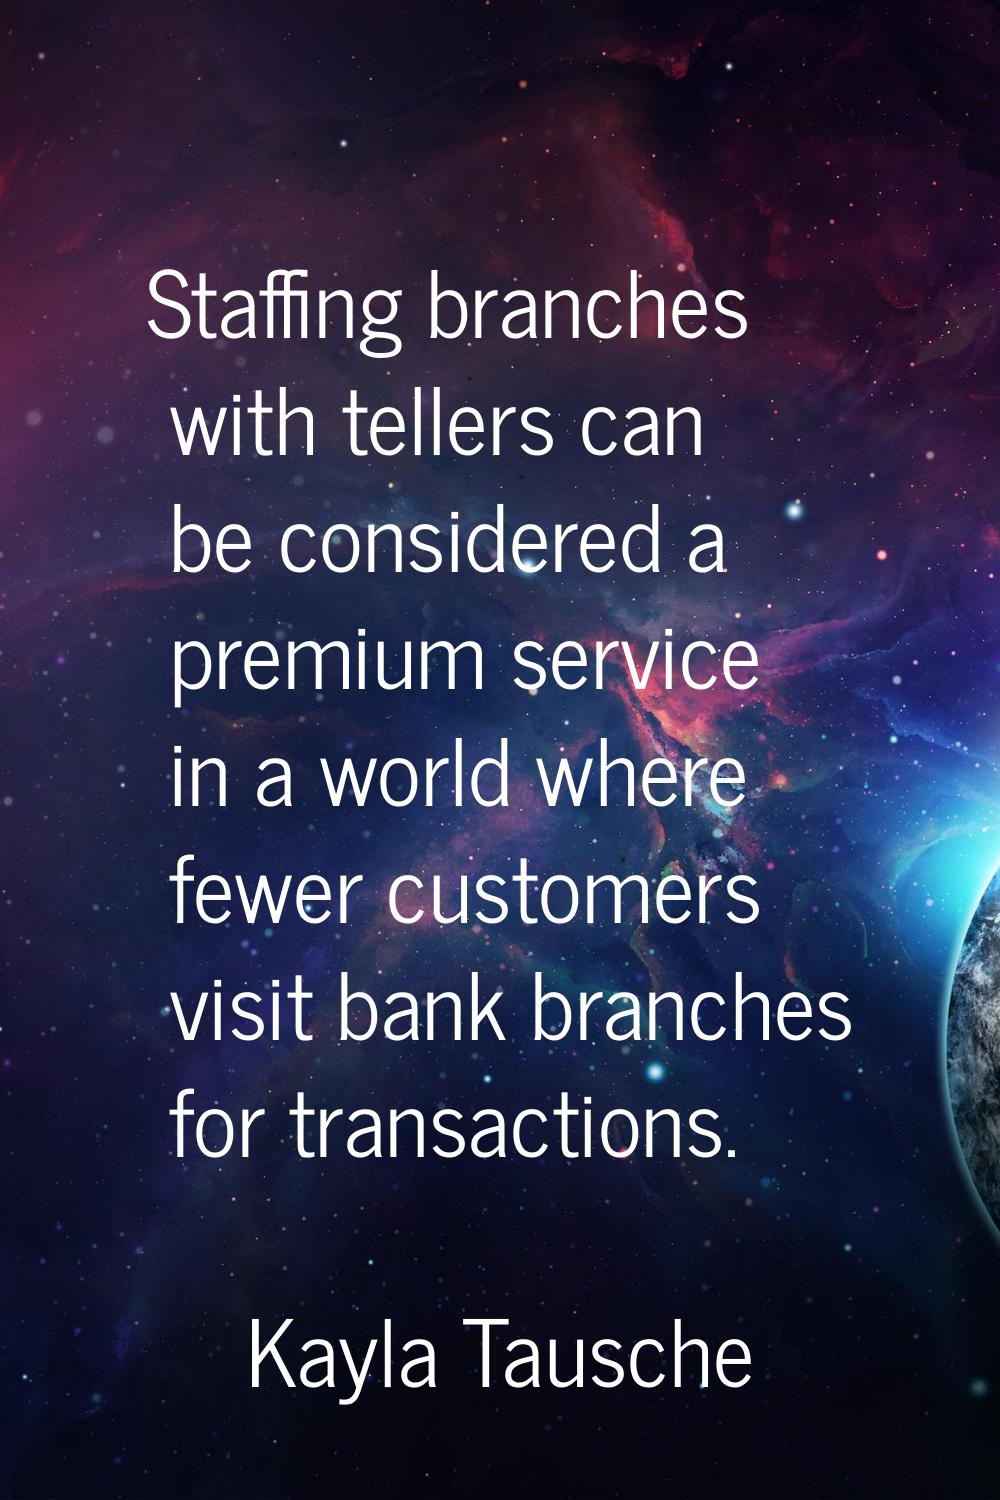 Staffing branches with tellers can be considered a premium service in a world where fewer customers